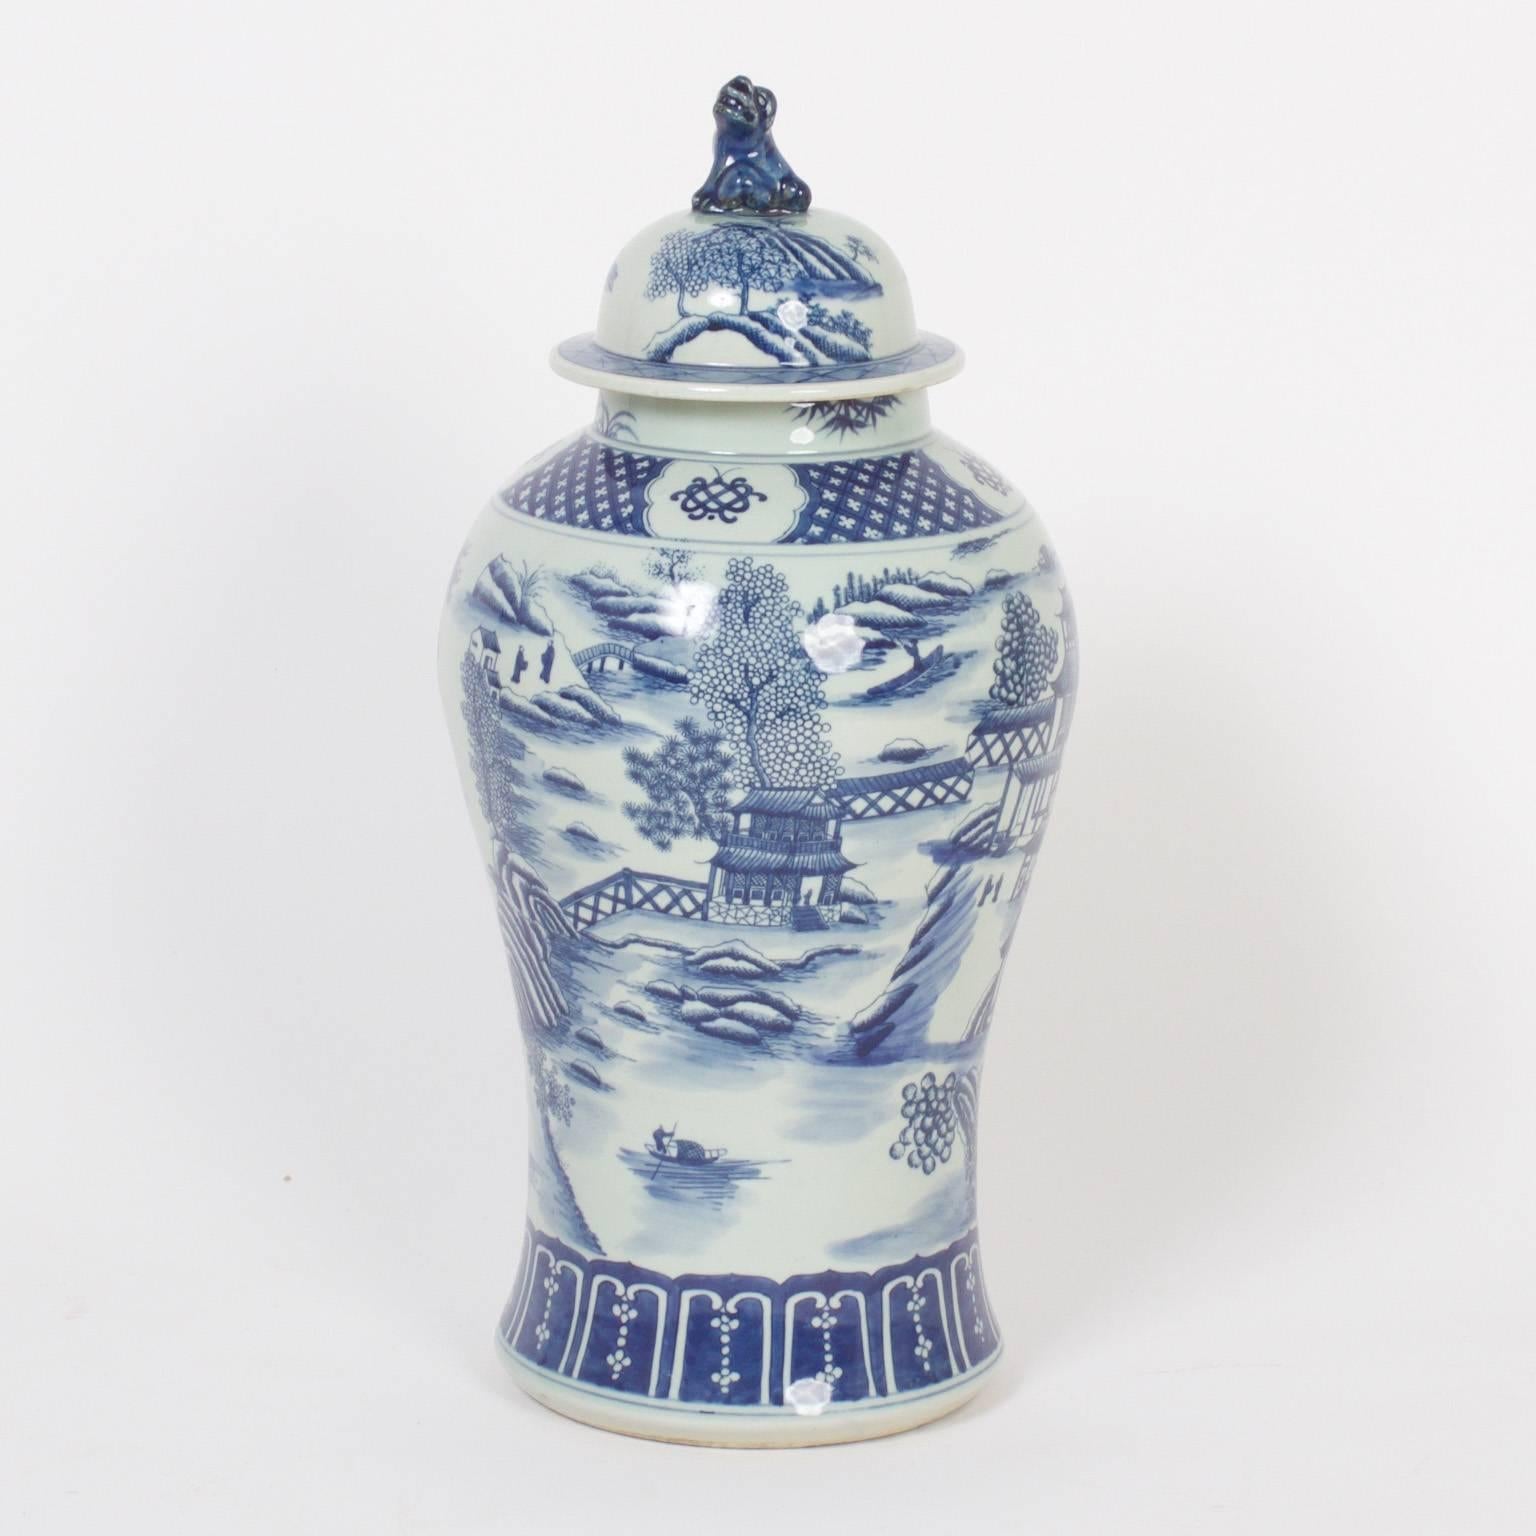 Chinoiserie Traditional Chinese Export Style Porcelain Lidded Jars